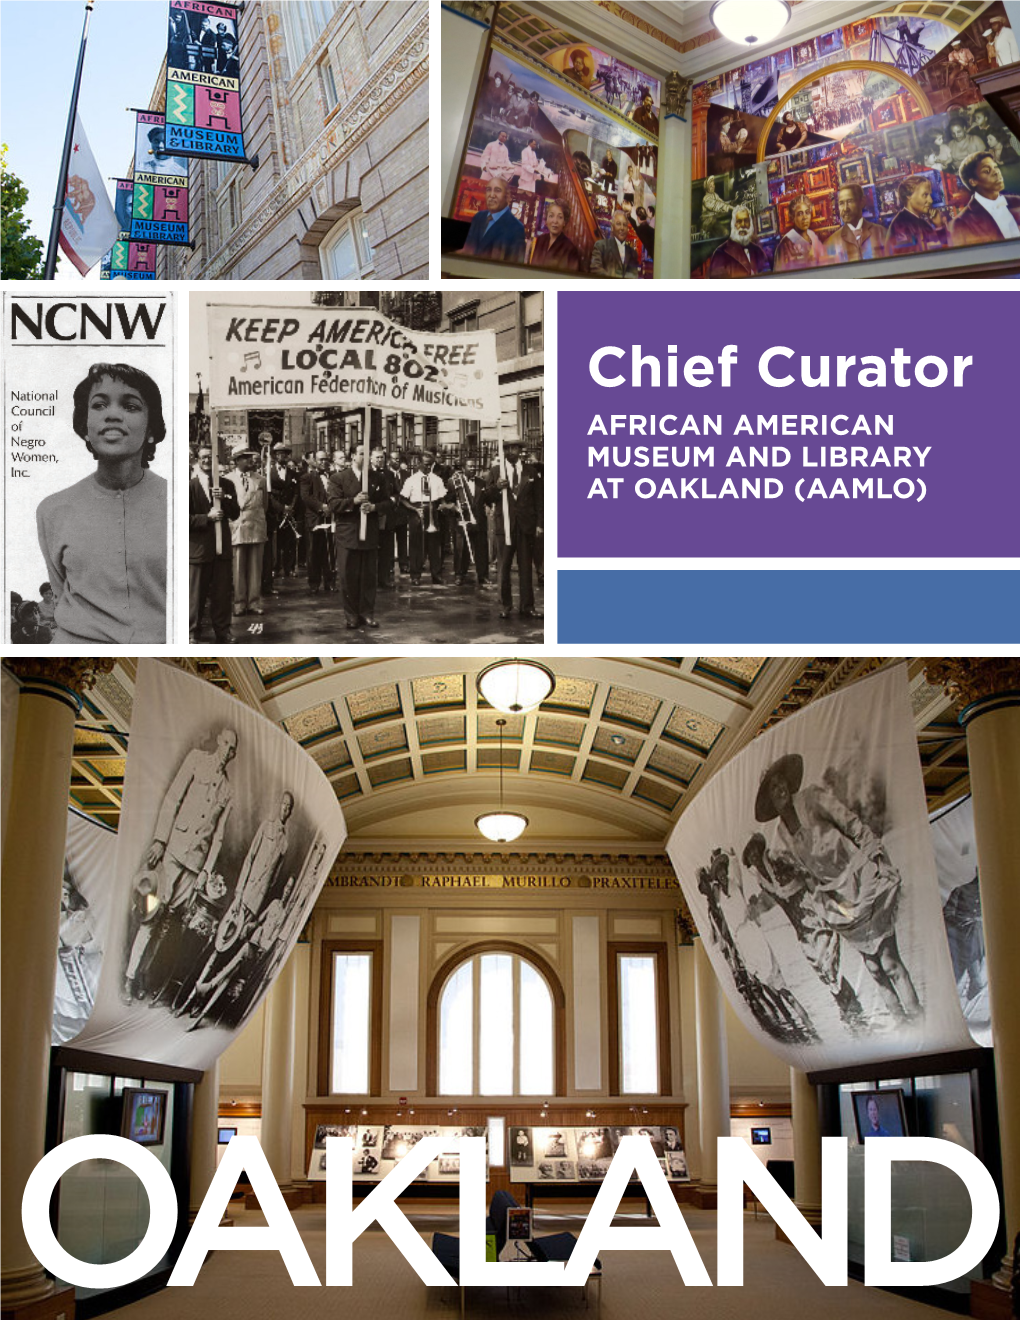 Chief Curator AFRICAN AMERICAN MUSEUM and LIBRARY at OAKLAND (AAMLO)